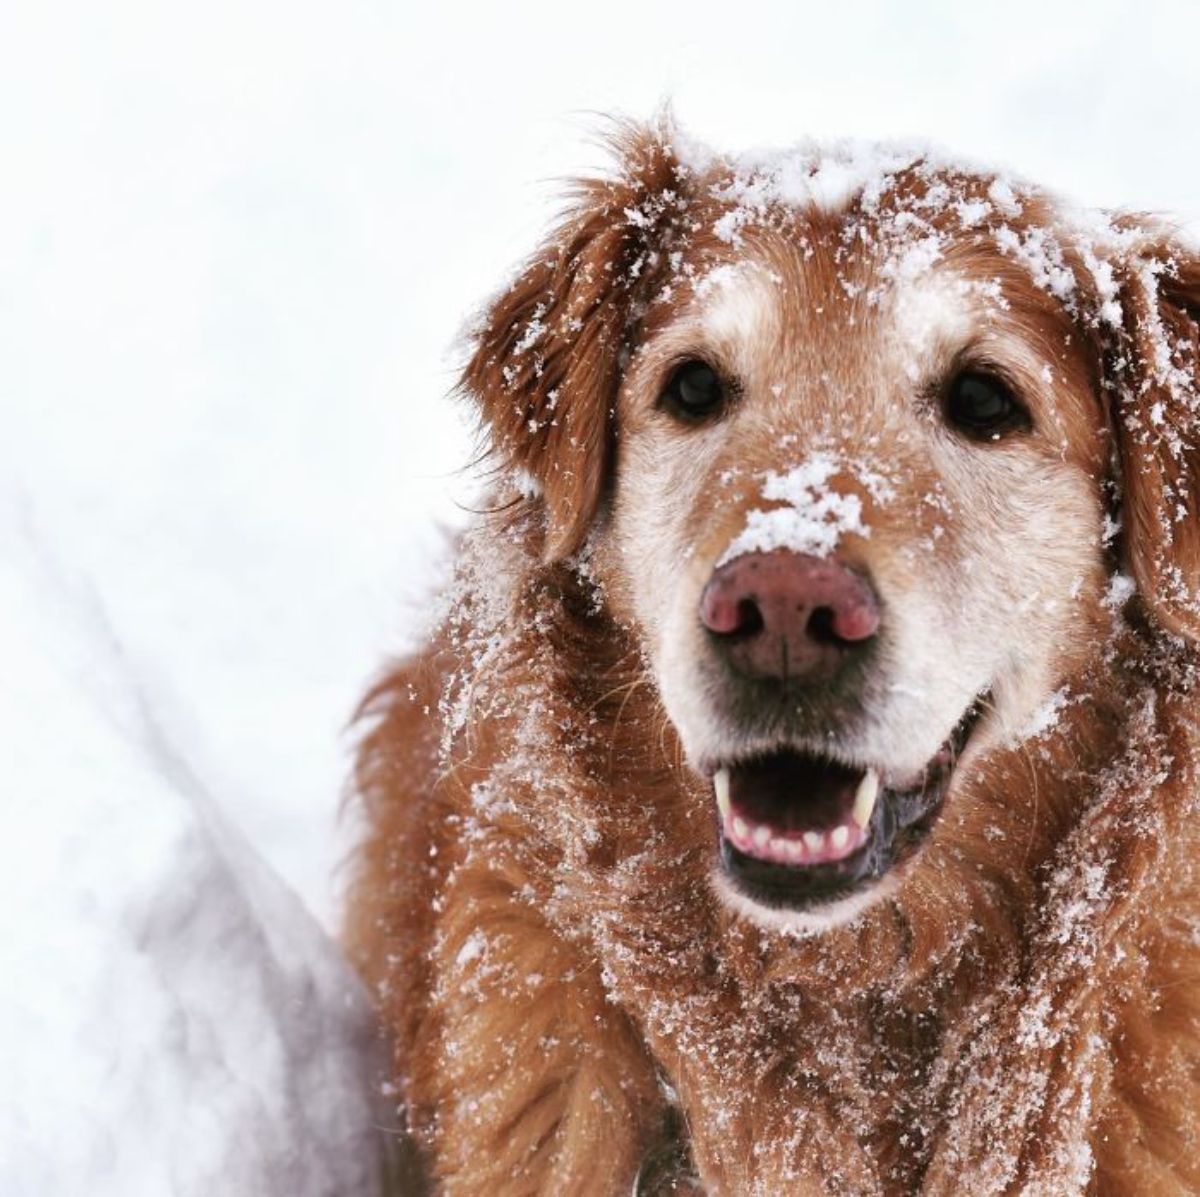 old golden retriever in snow with snow on its face and body